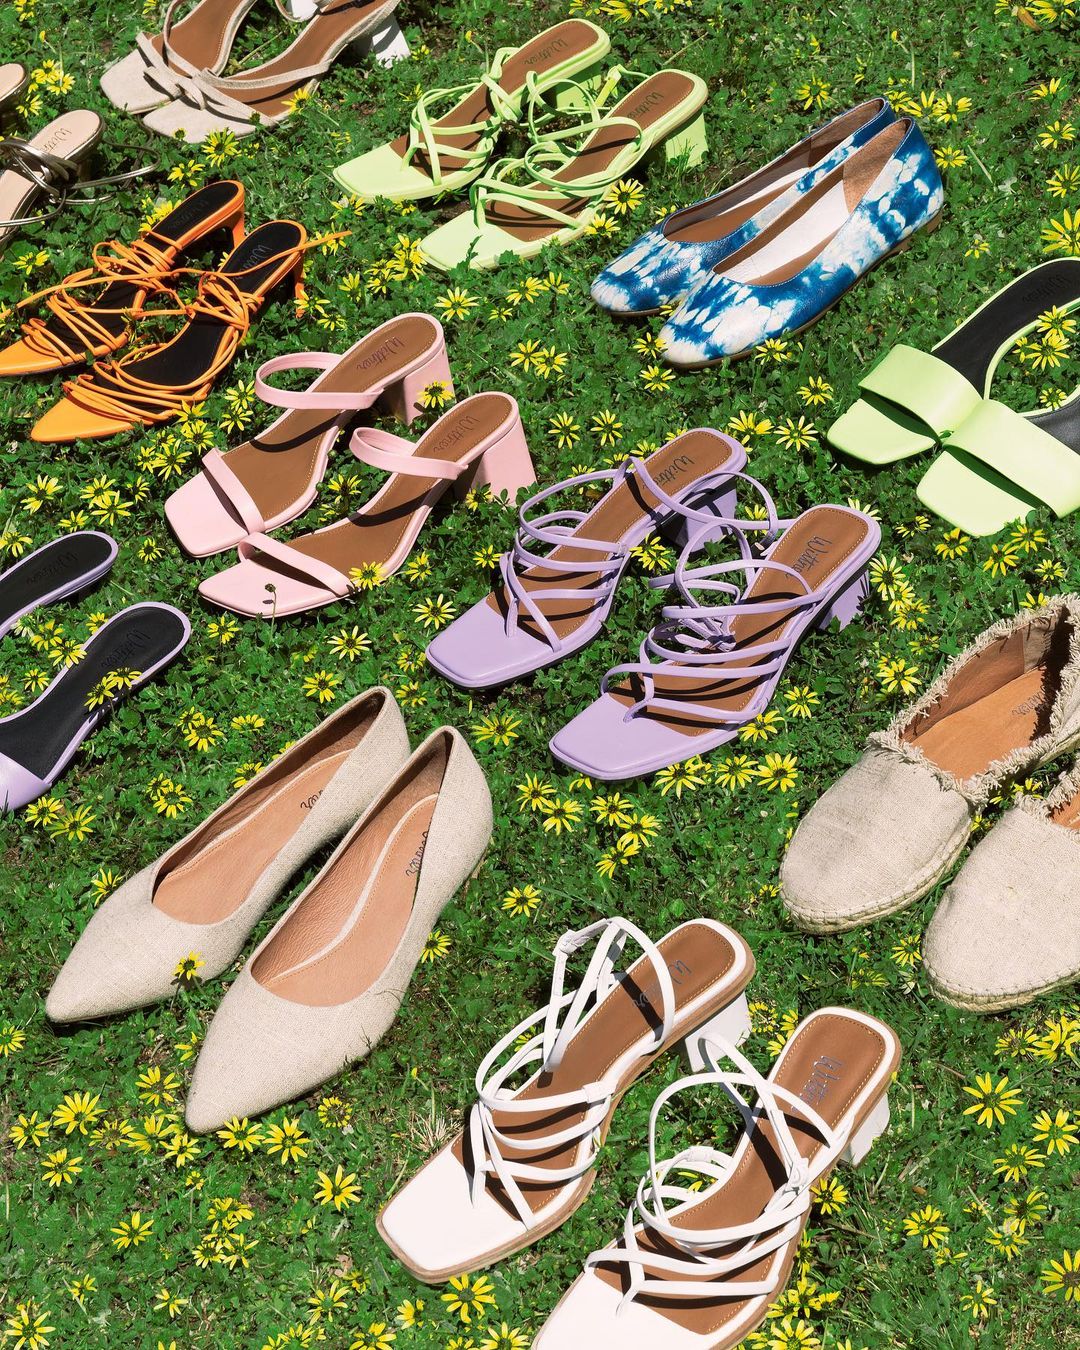 Shoe-up! How to Know Which Shoes Match Which Occasion